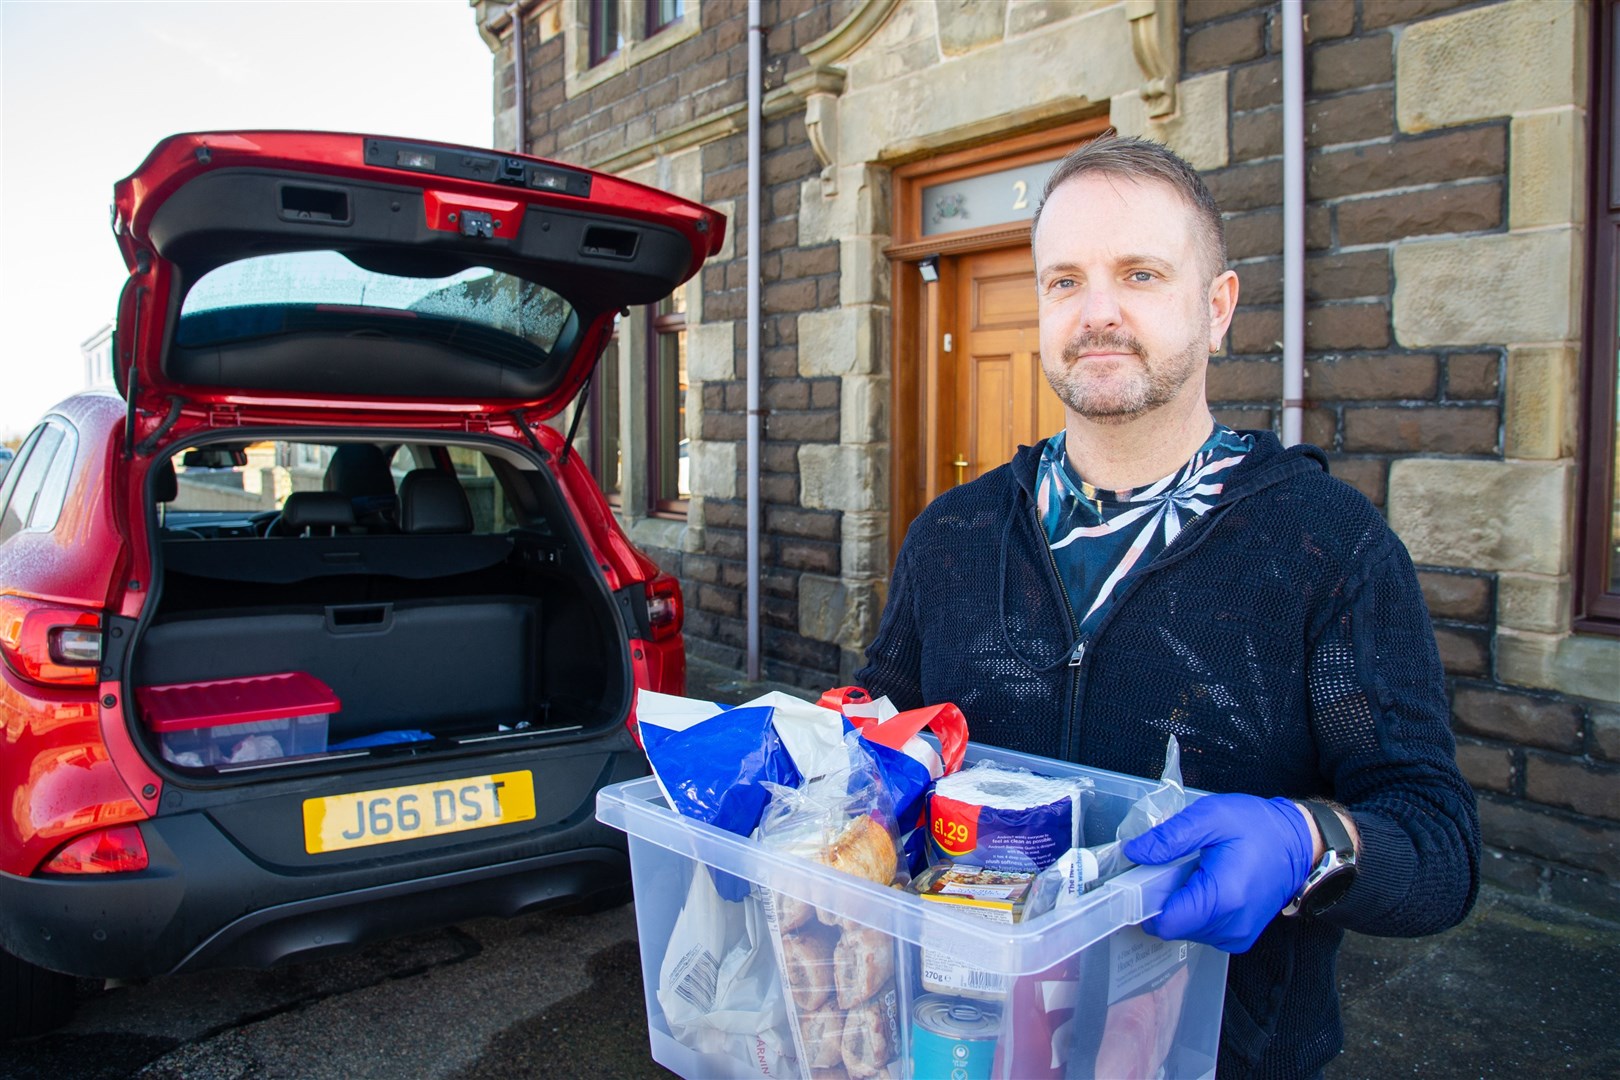 Buckie Kindness Group's John Stuart gets ready to go out with another delivery during lockdown last year. Picture: Daniel Forsyth.